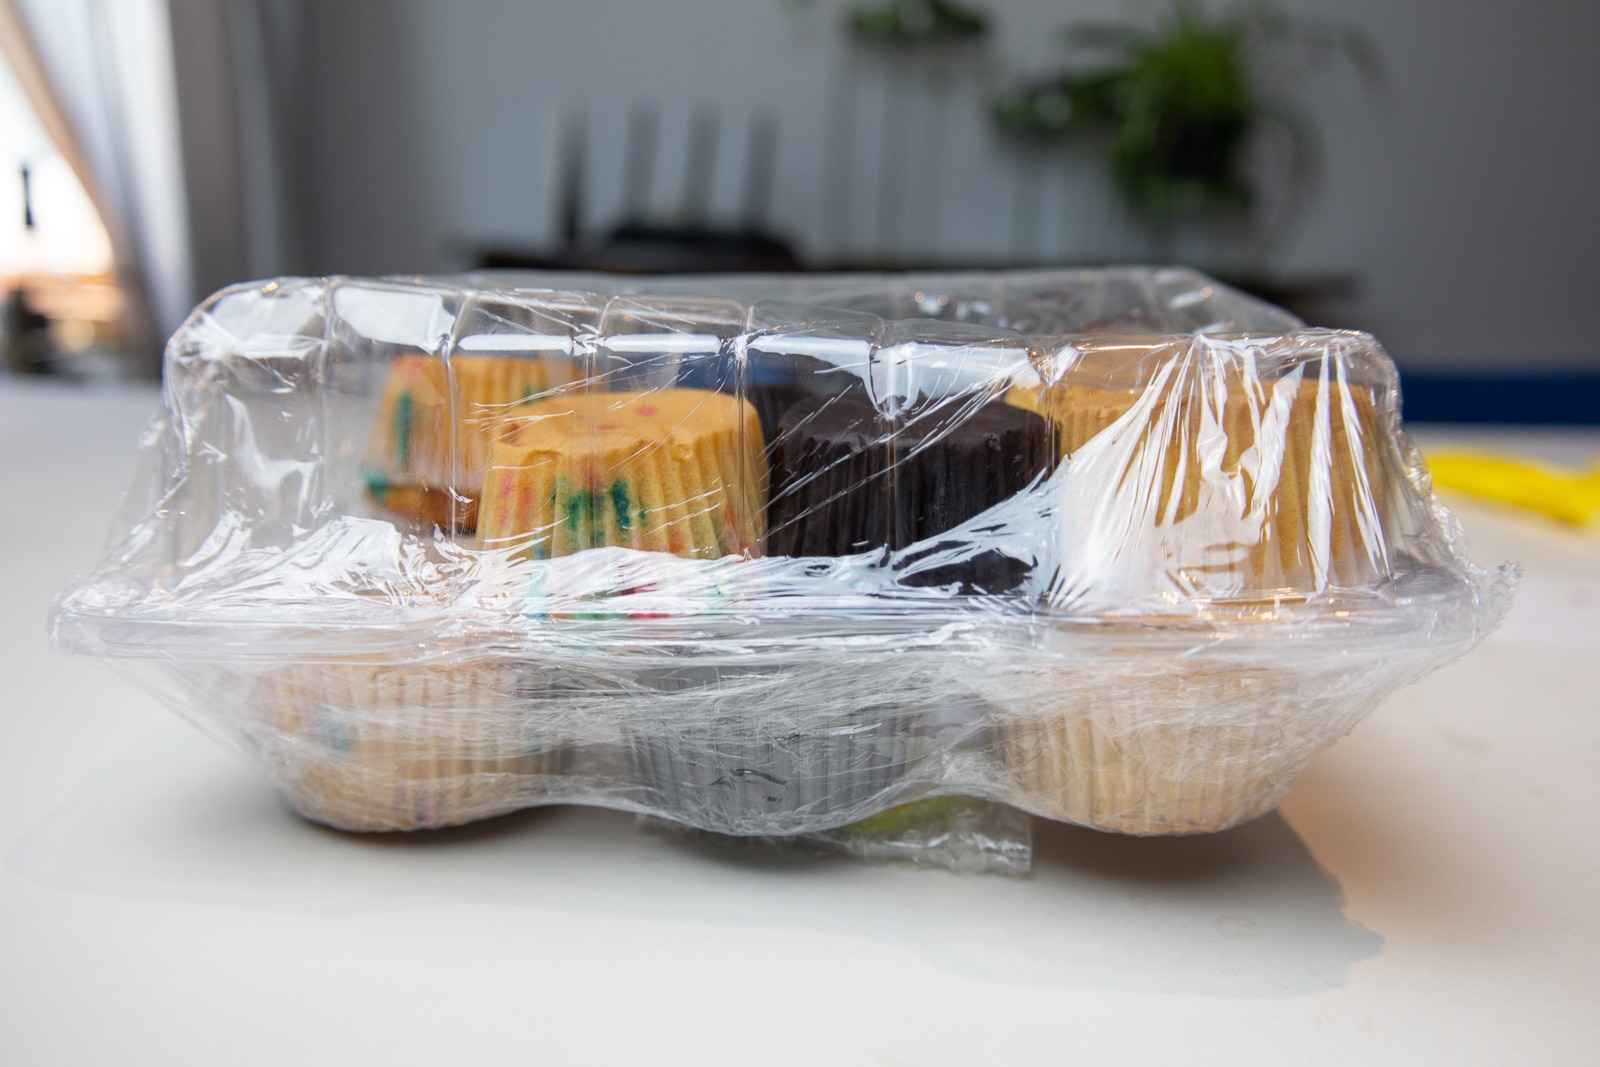 Sweetology cupcakes packaged